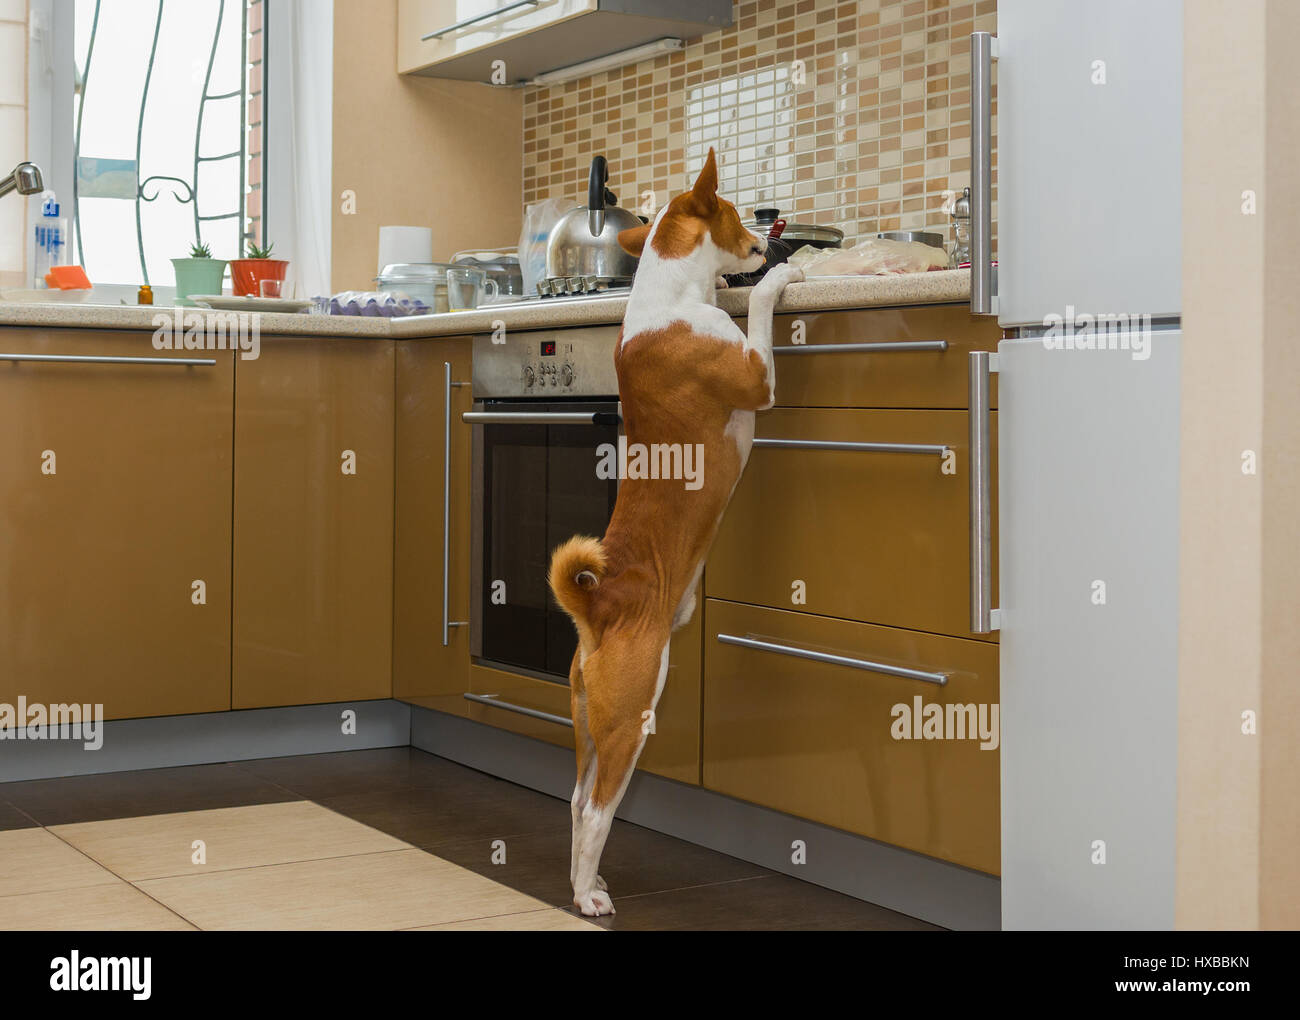 Hungry basenji dog thoroughly inspecting kitchen while being home alone Stock Photo